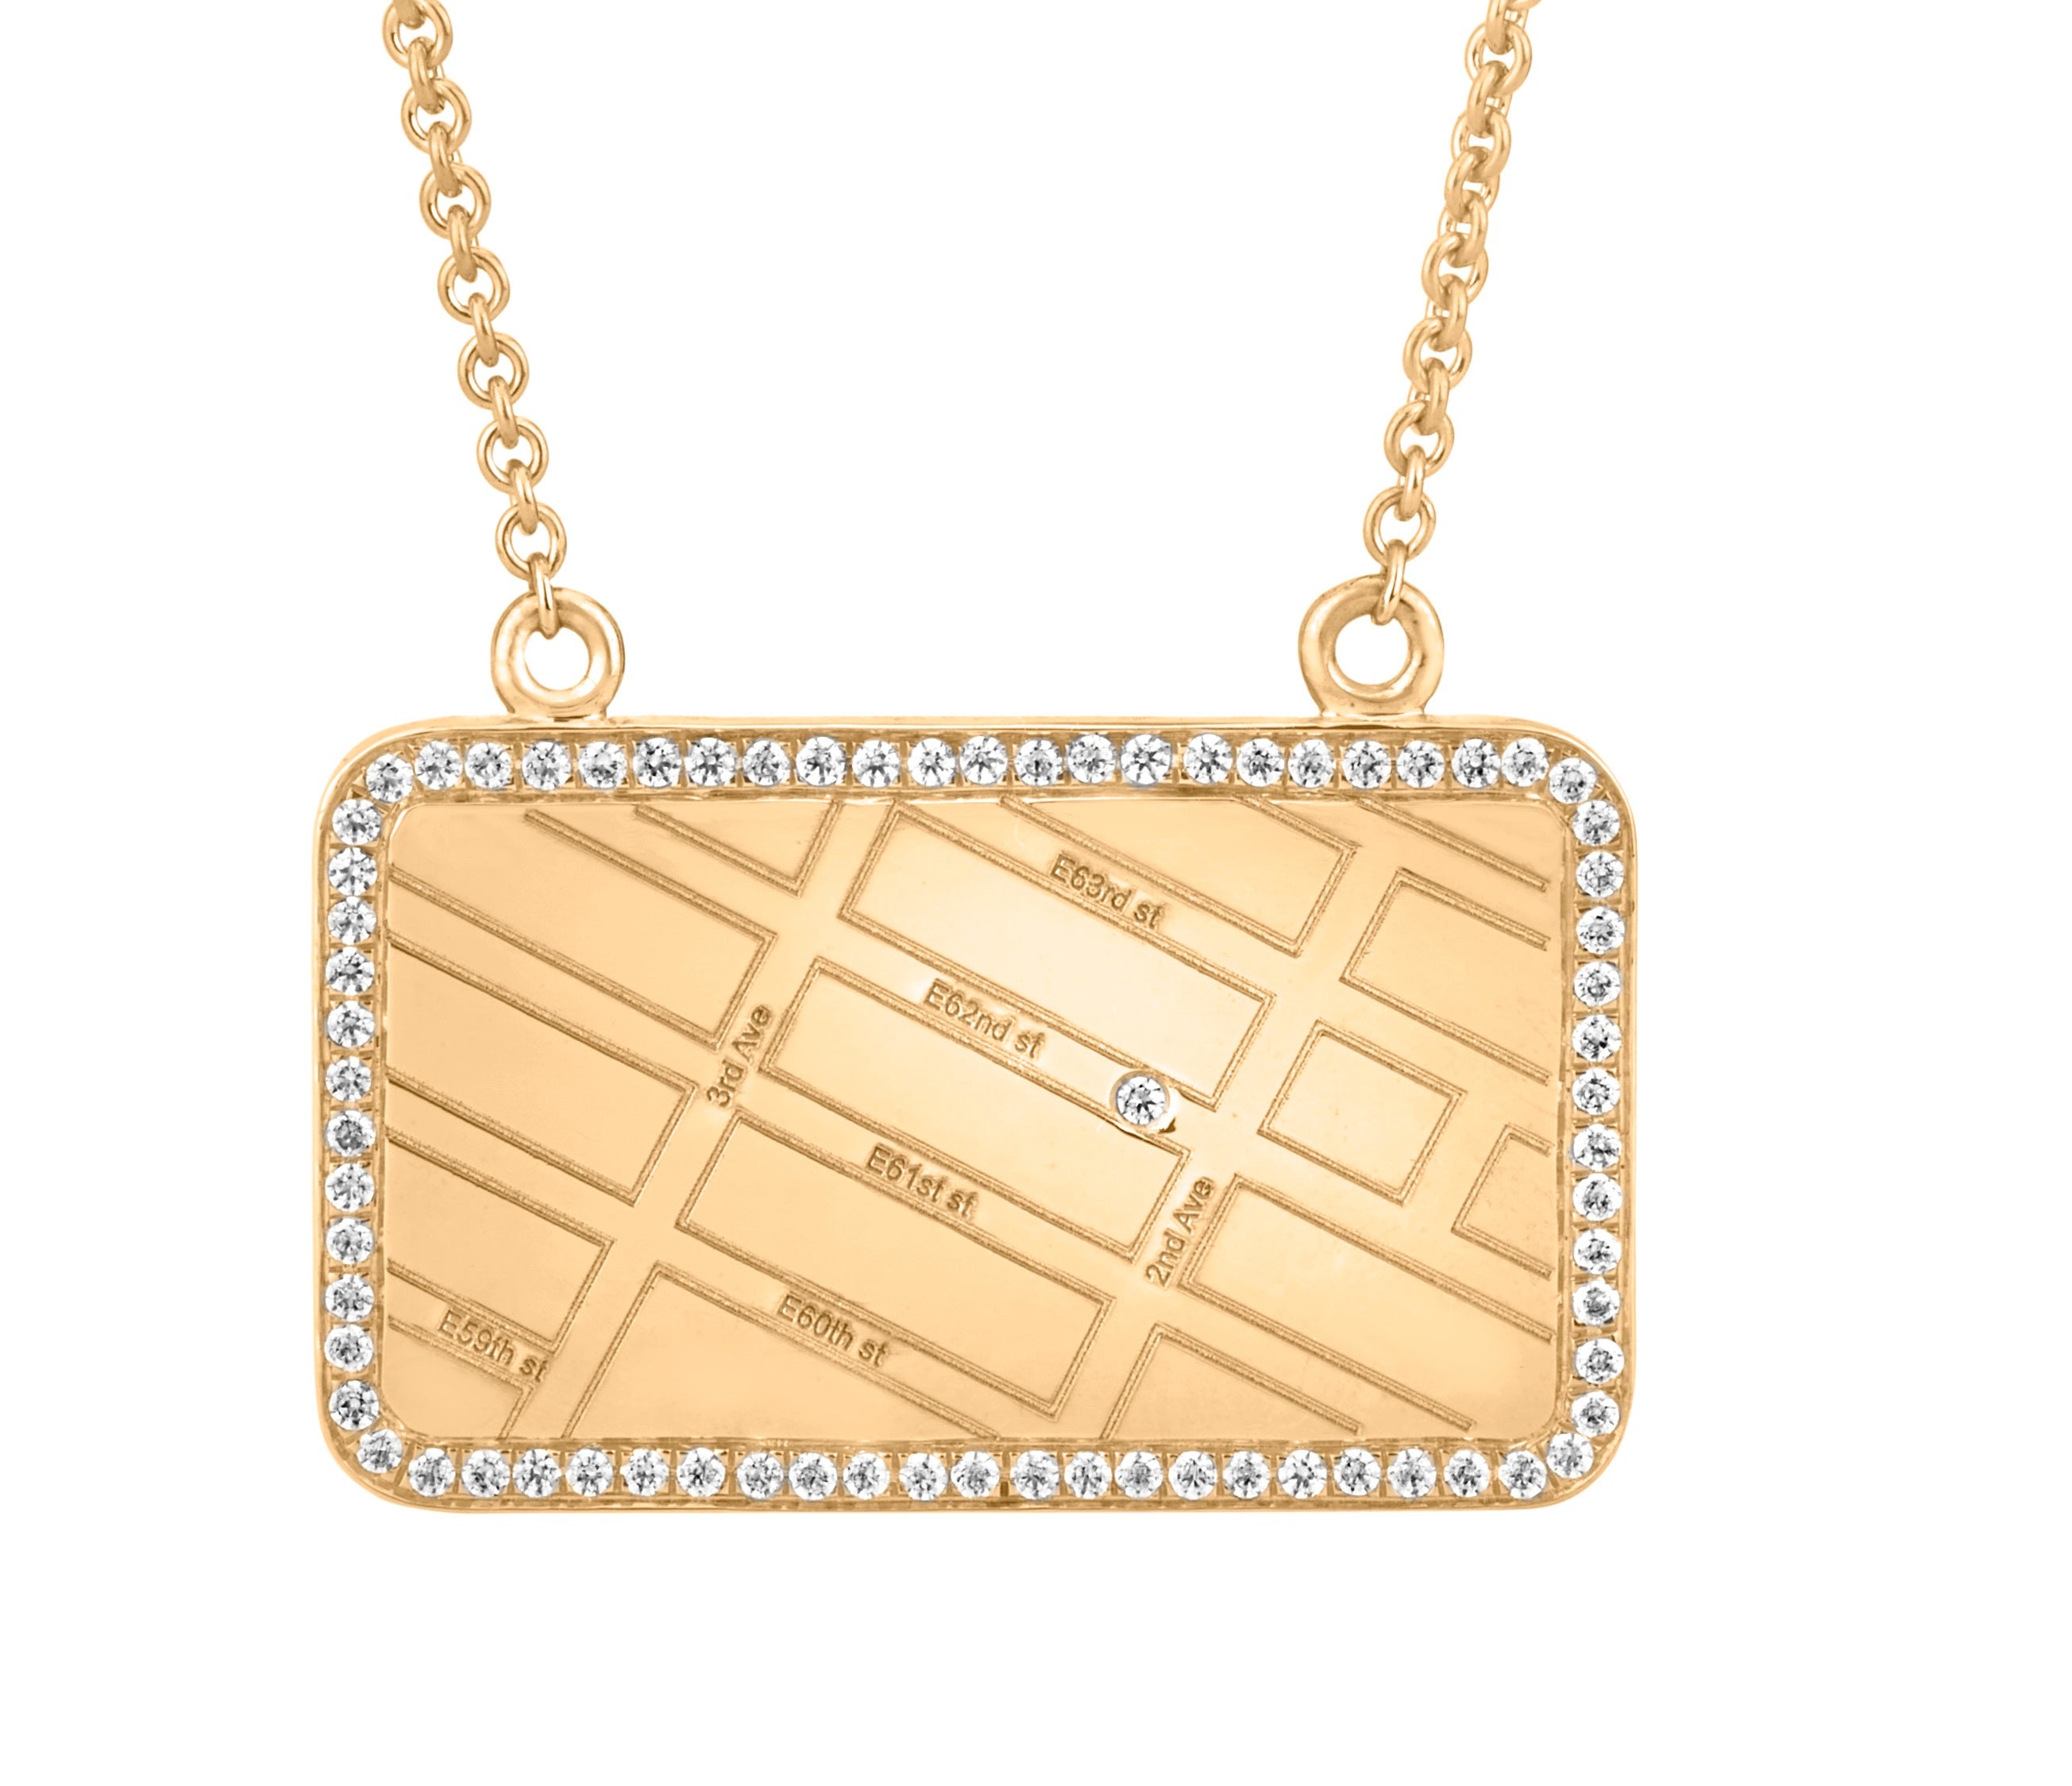 A.JAFFE  YELLOW GOLD MAP NECKLACE WITH DIAMONDS